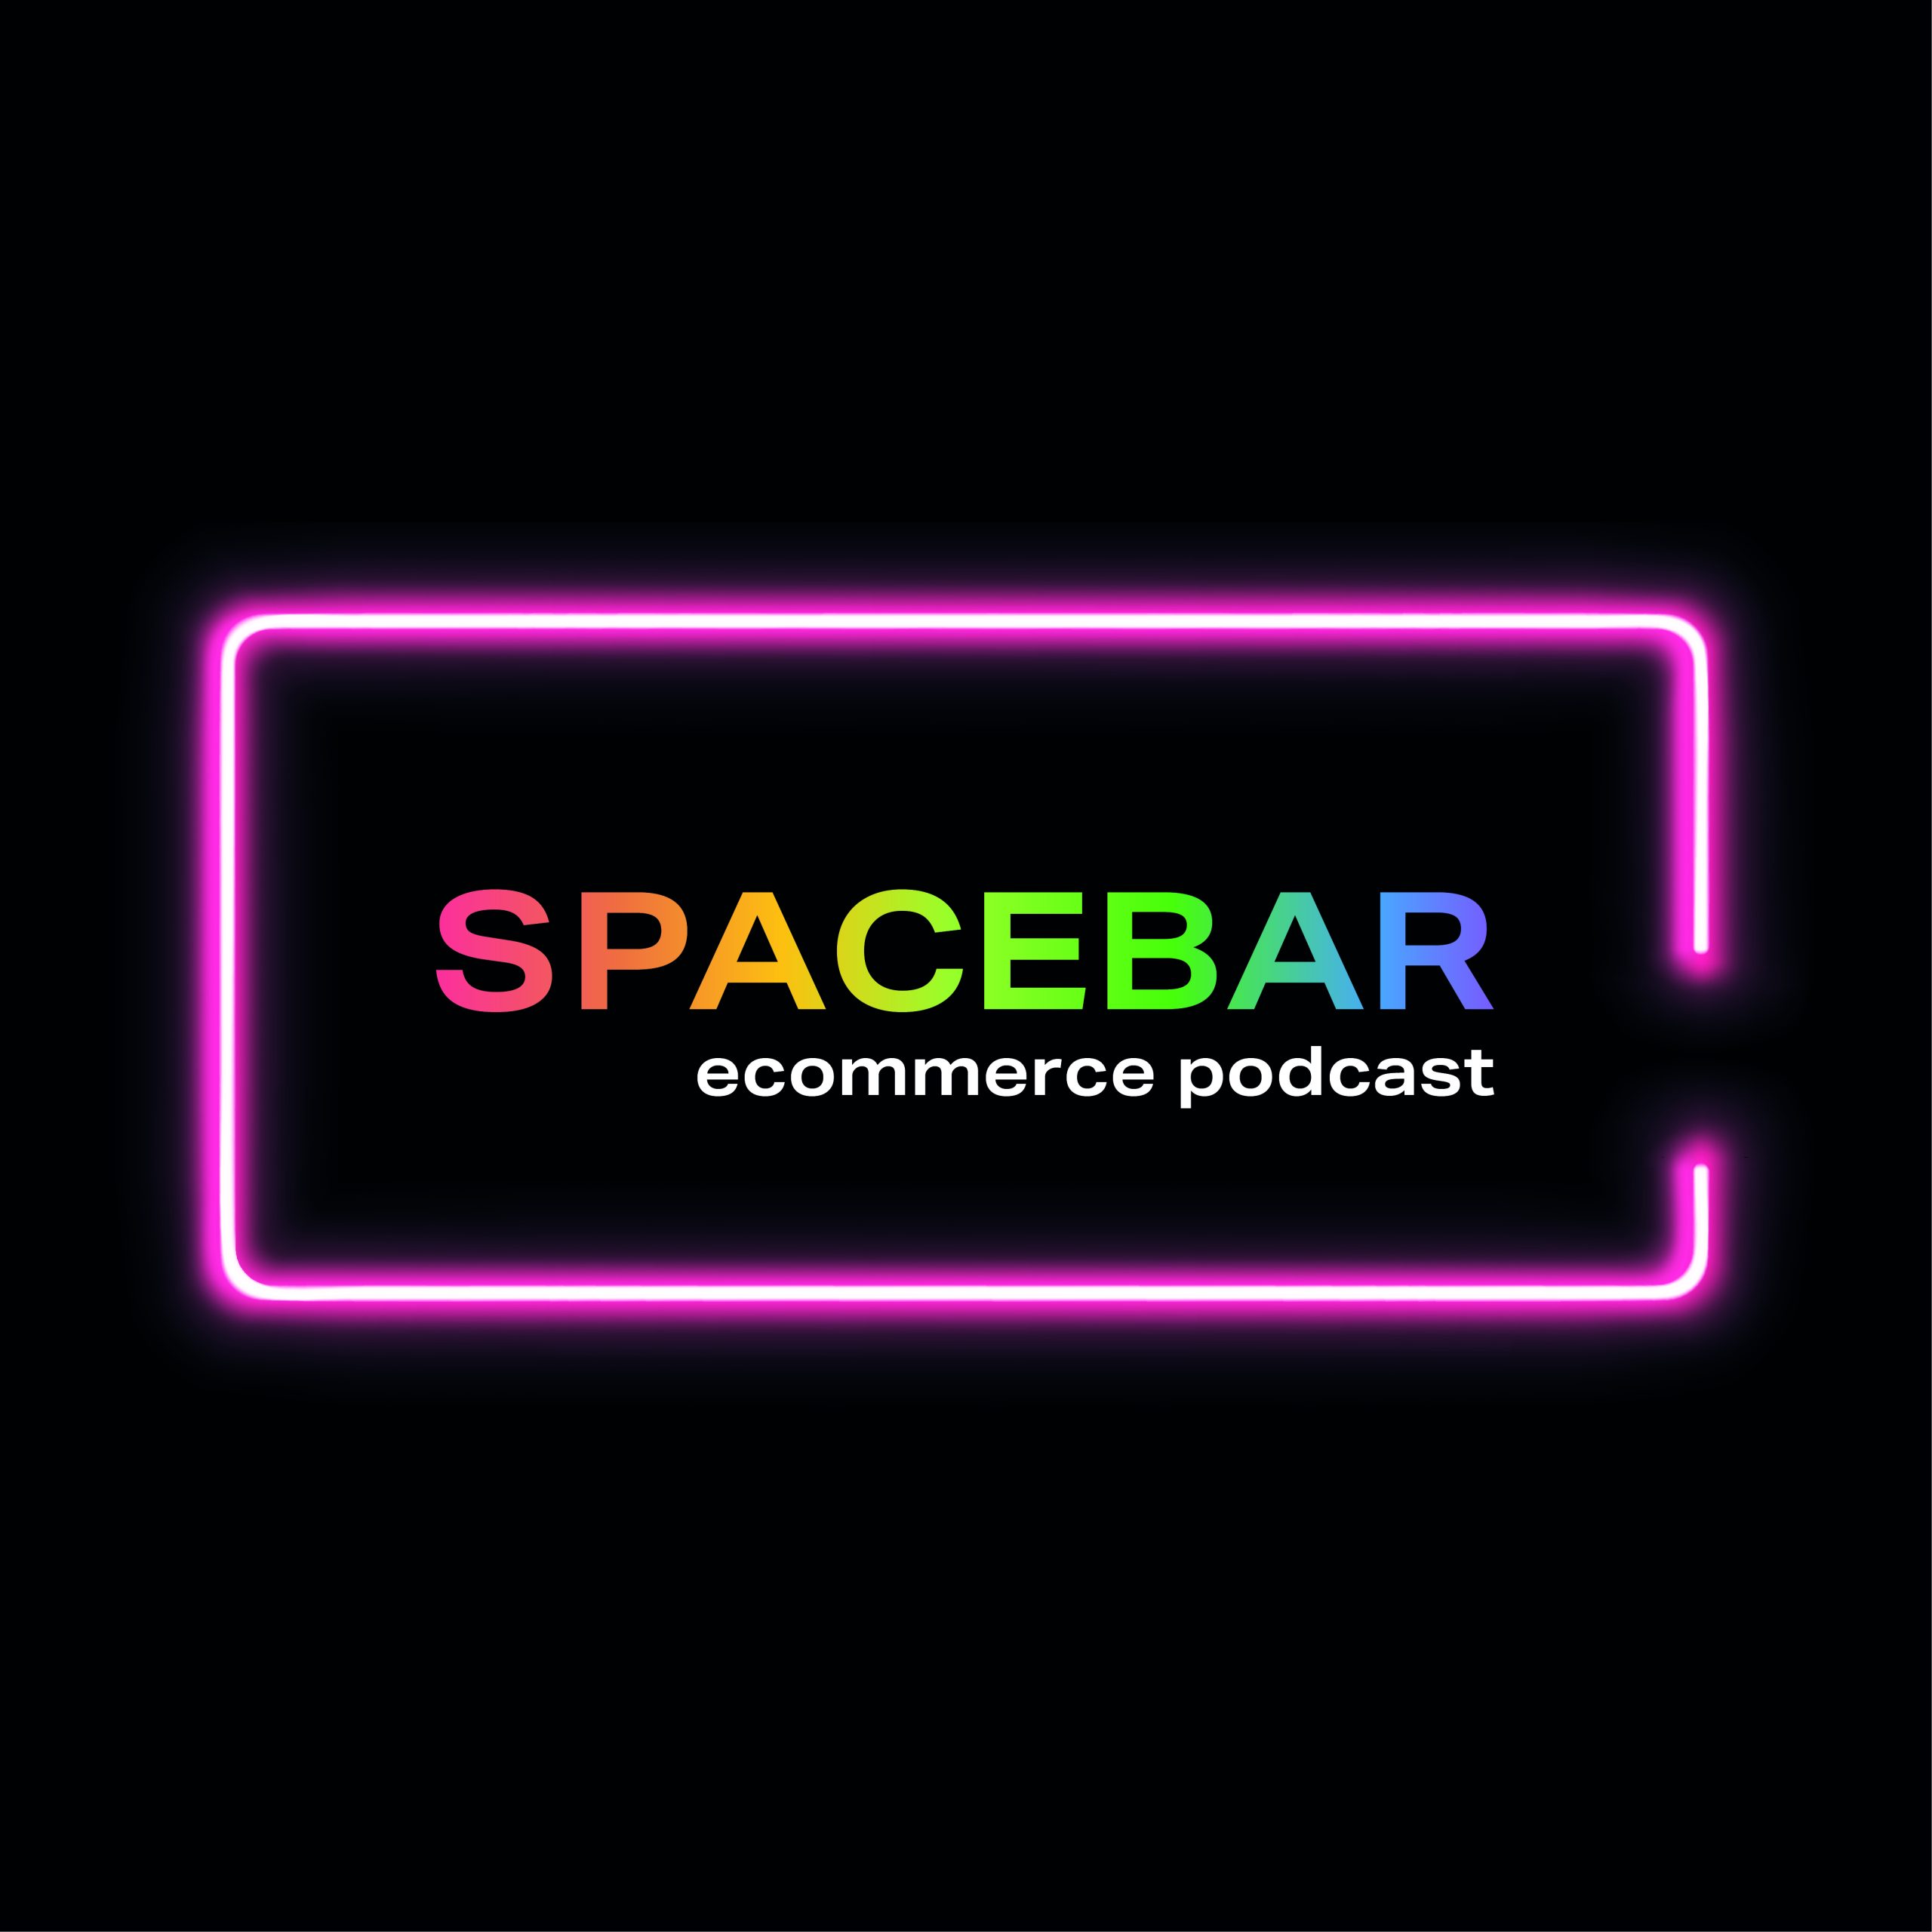 Image: The Space Bar Podcast